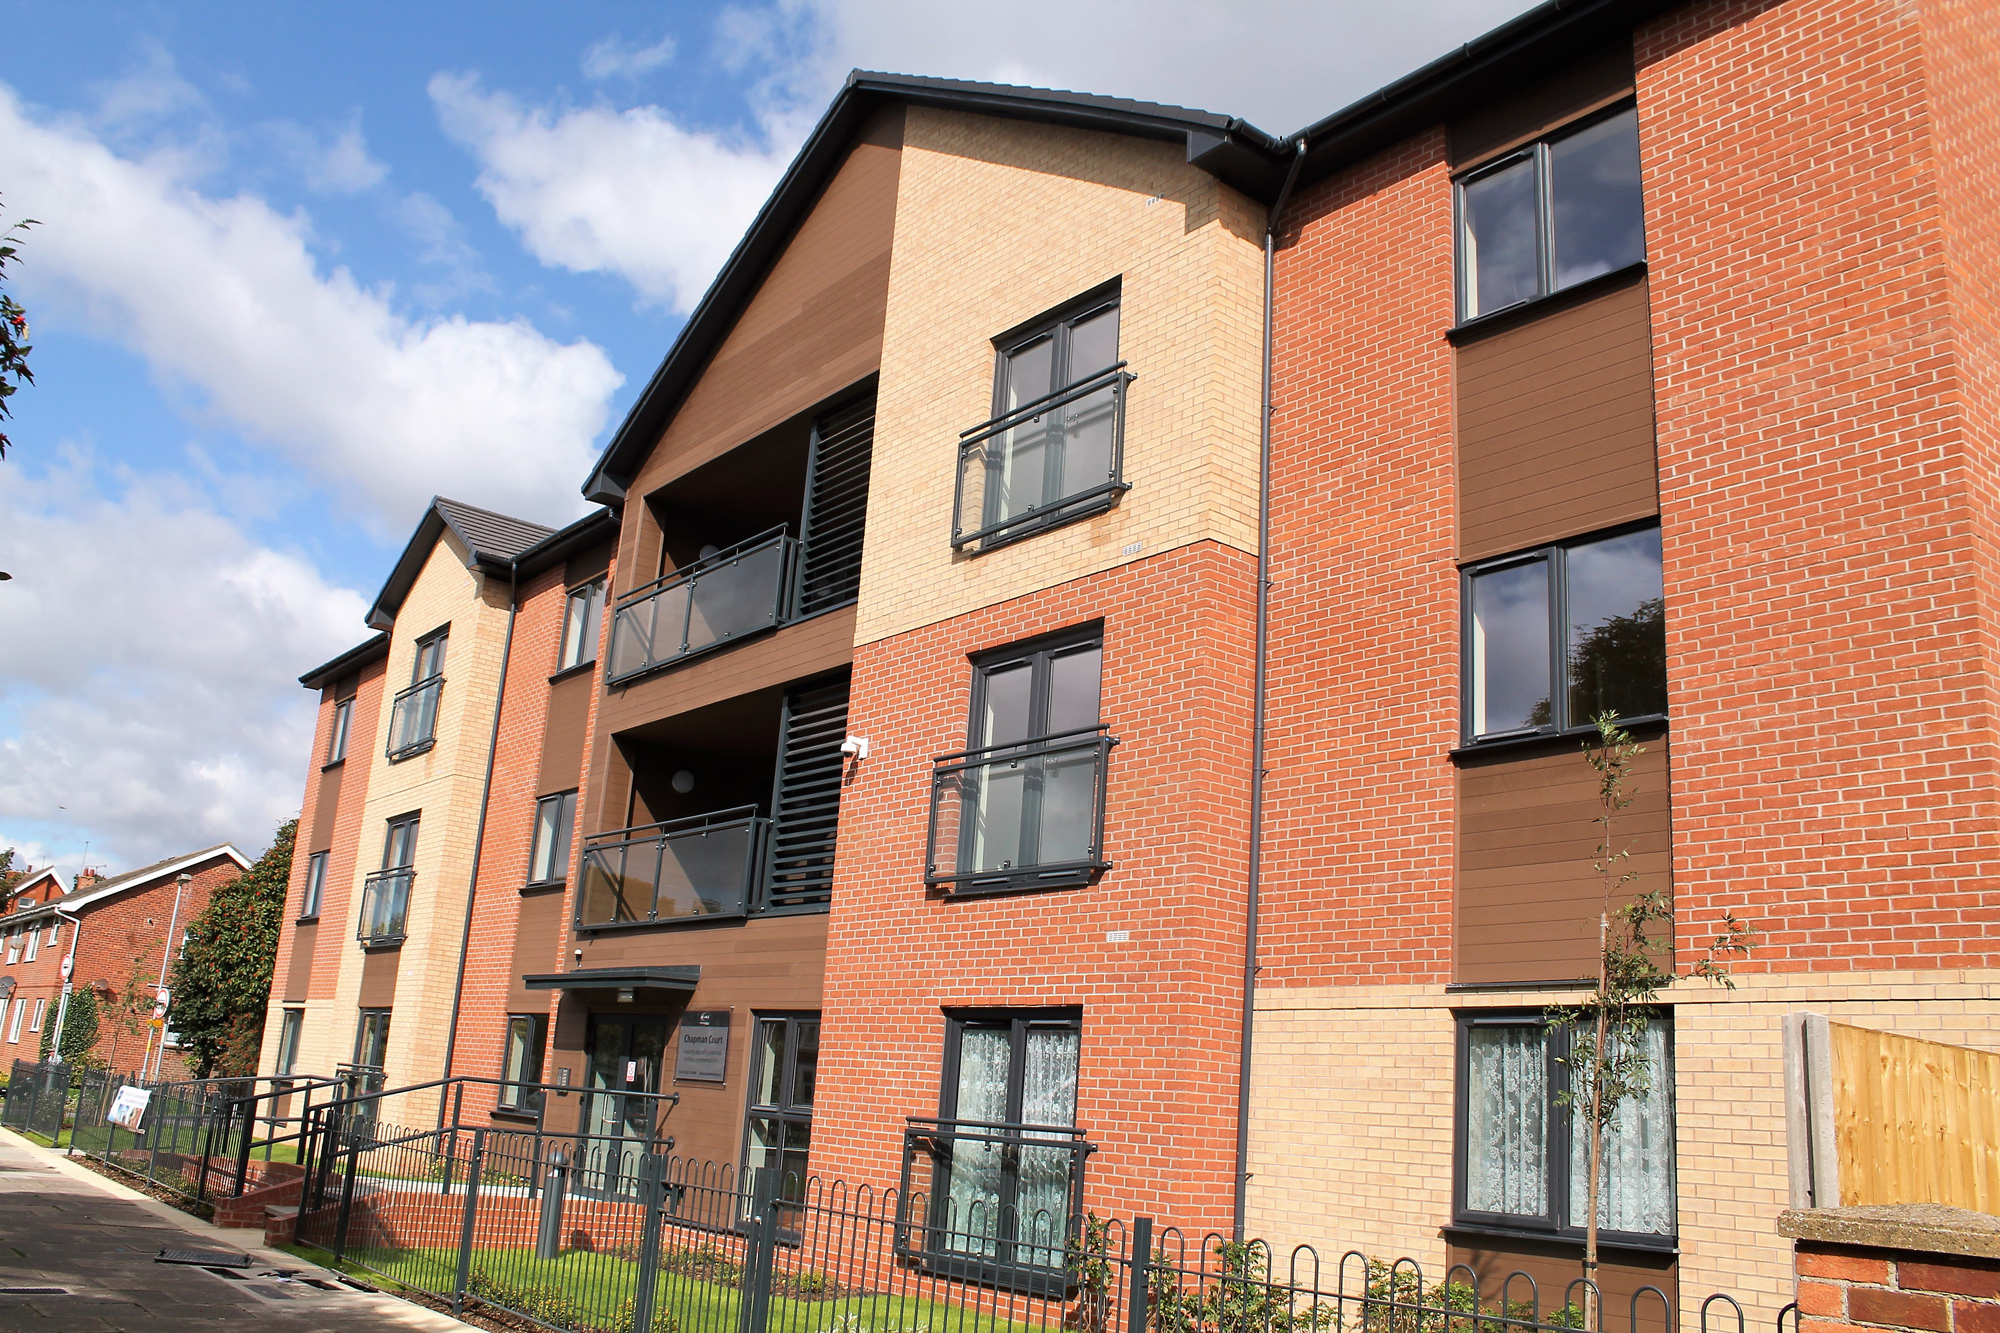 LACE Housing shortlisted for property award